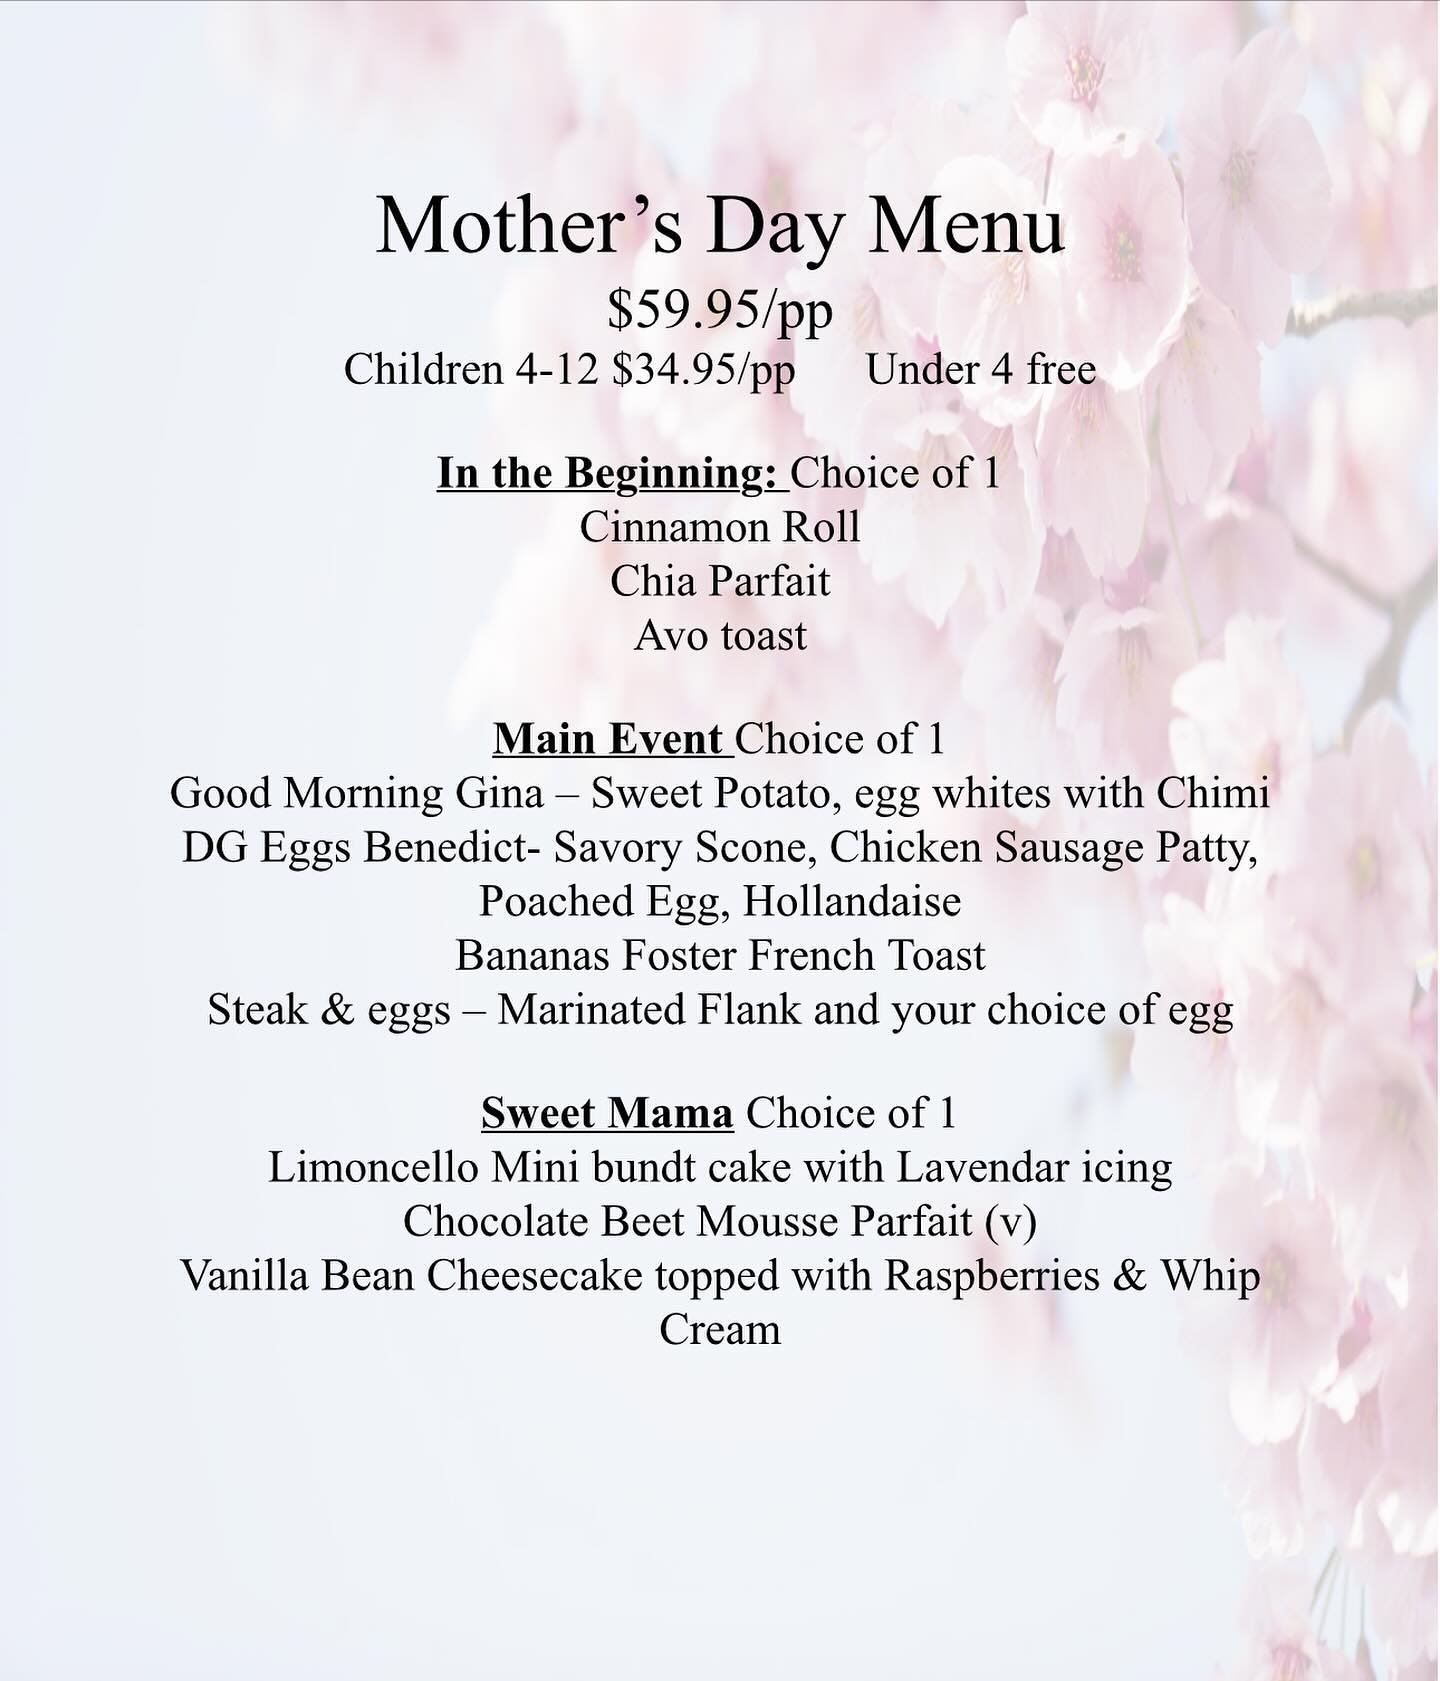 Mother&rsquo;s Day is only 1 month away. Make your plans today !

Enjoy a gluten free, dairy free, farm fresh and small batch brunch with us! 

Reservations only #opentable 

#glutenfree #dairyfree #ourpequannock #smallbatchbaking 
#togetherwearelimi